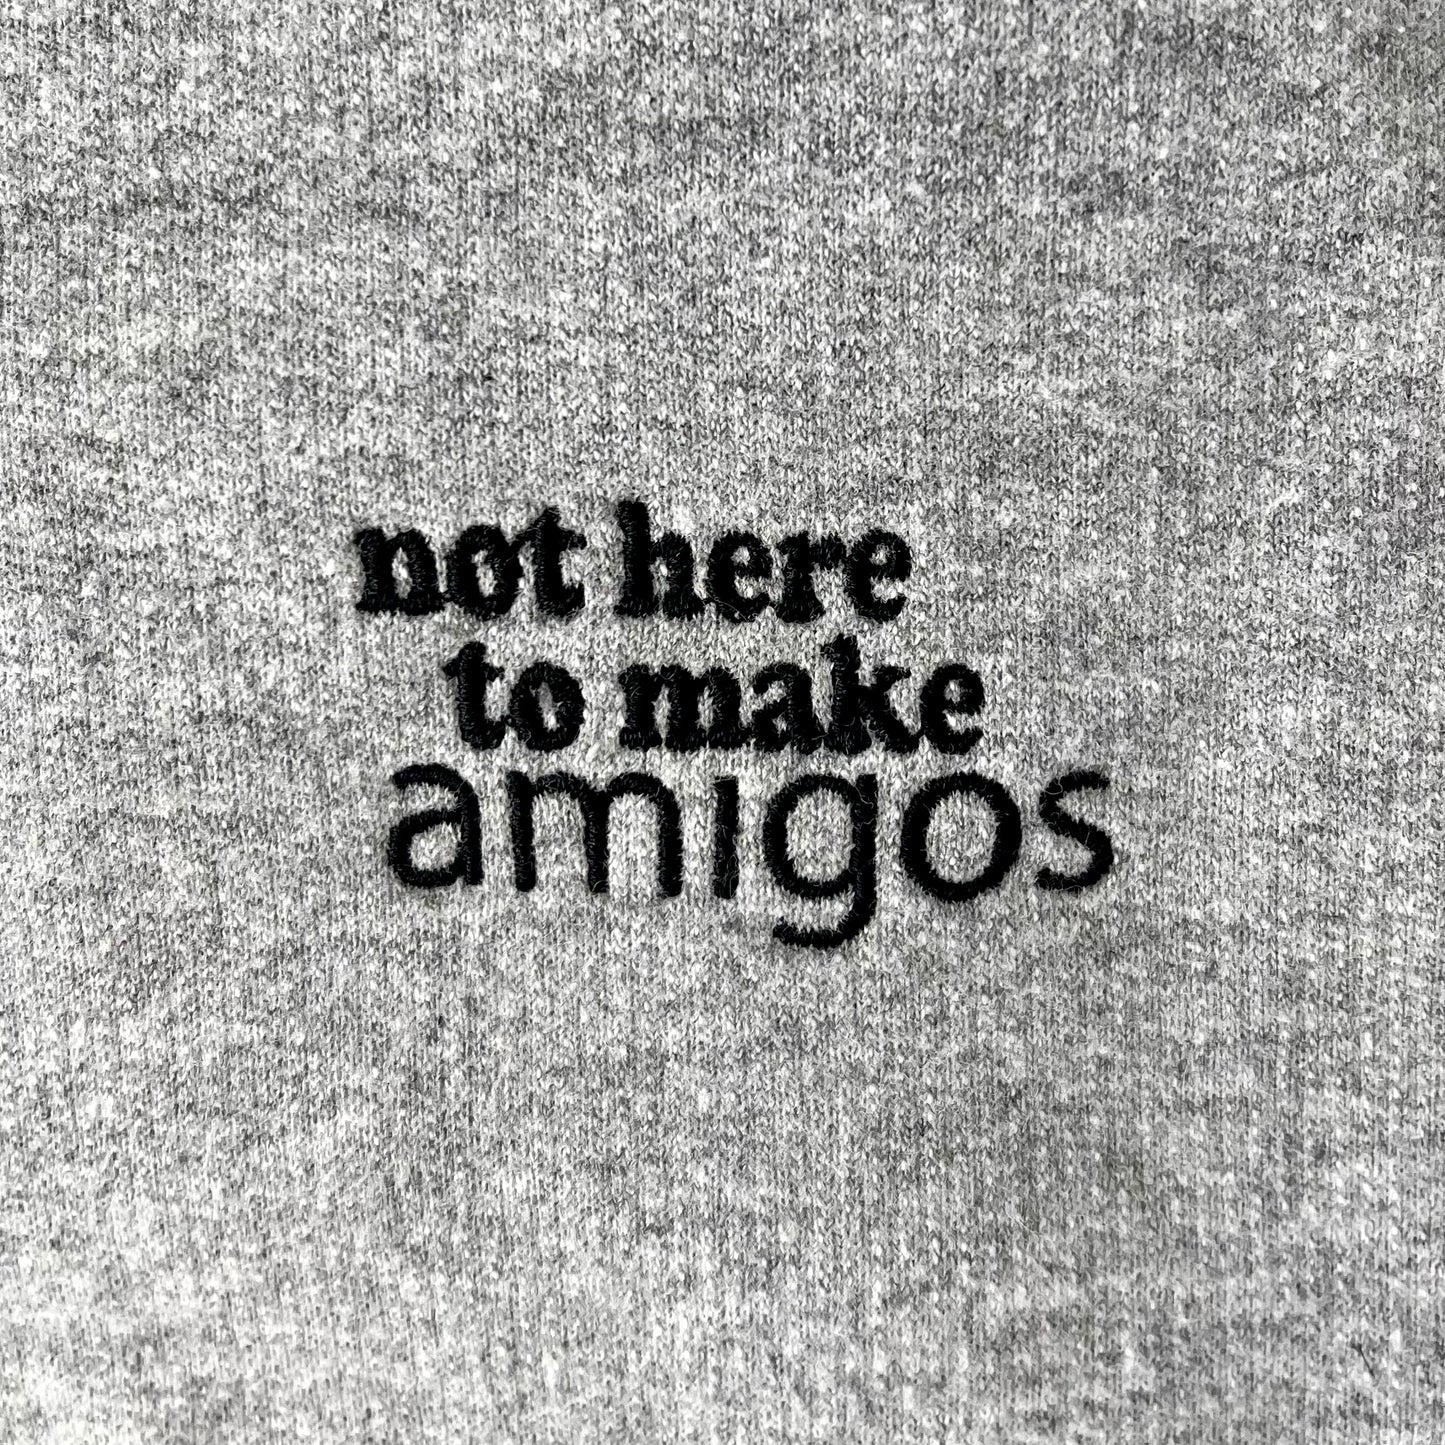 "Not here to make amigos" Hoodie 👯‍♂️